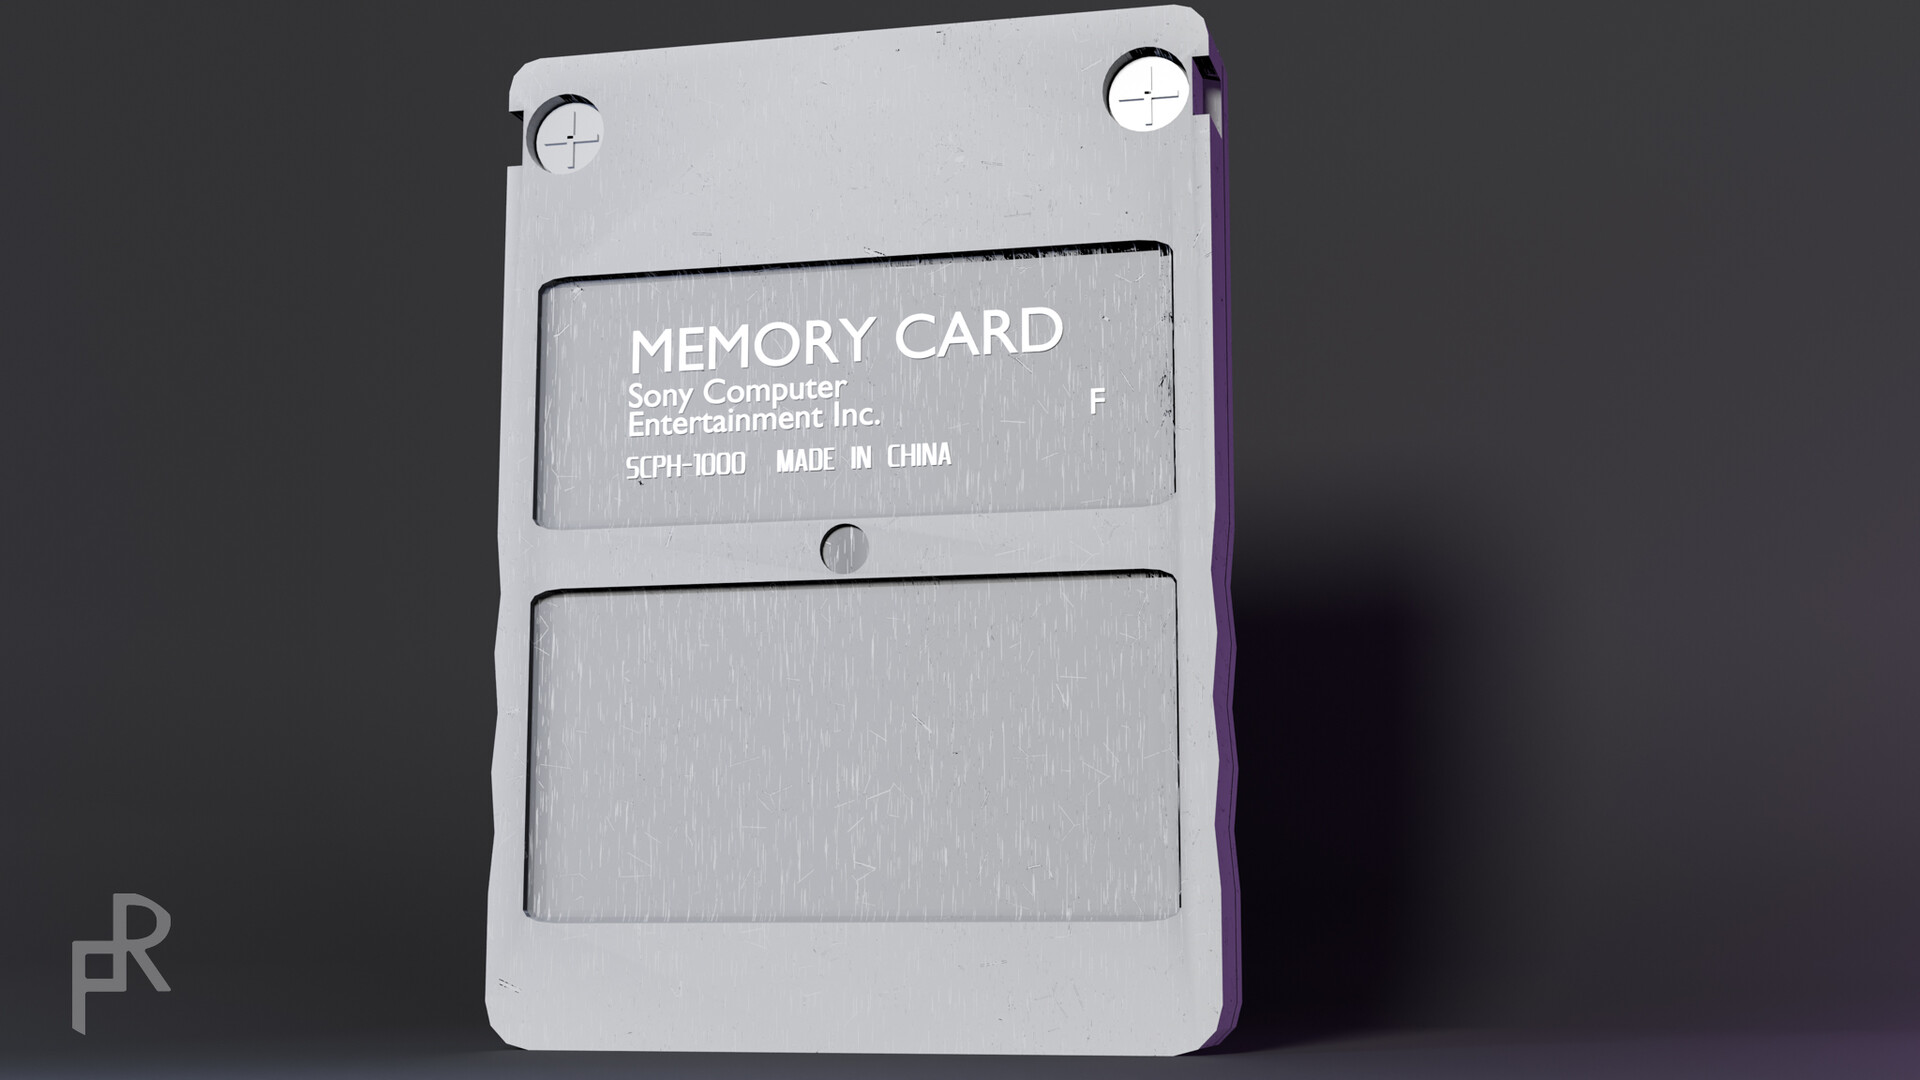 Memory Card Playstation 2 32MB SONY, 3D CAD Model Library